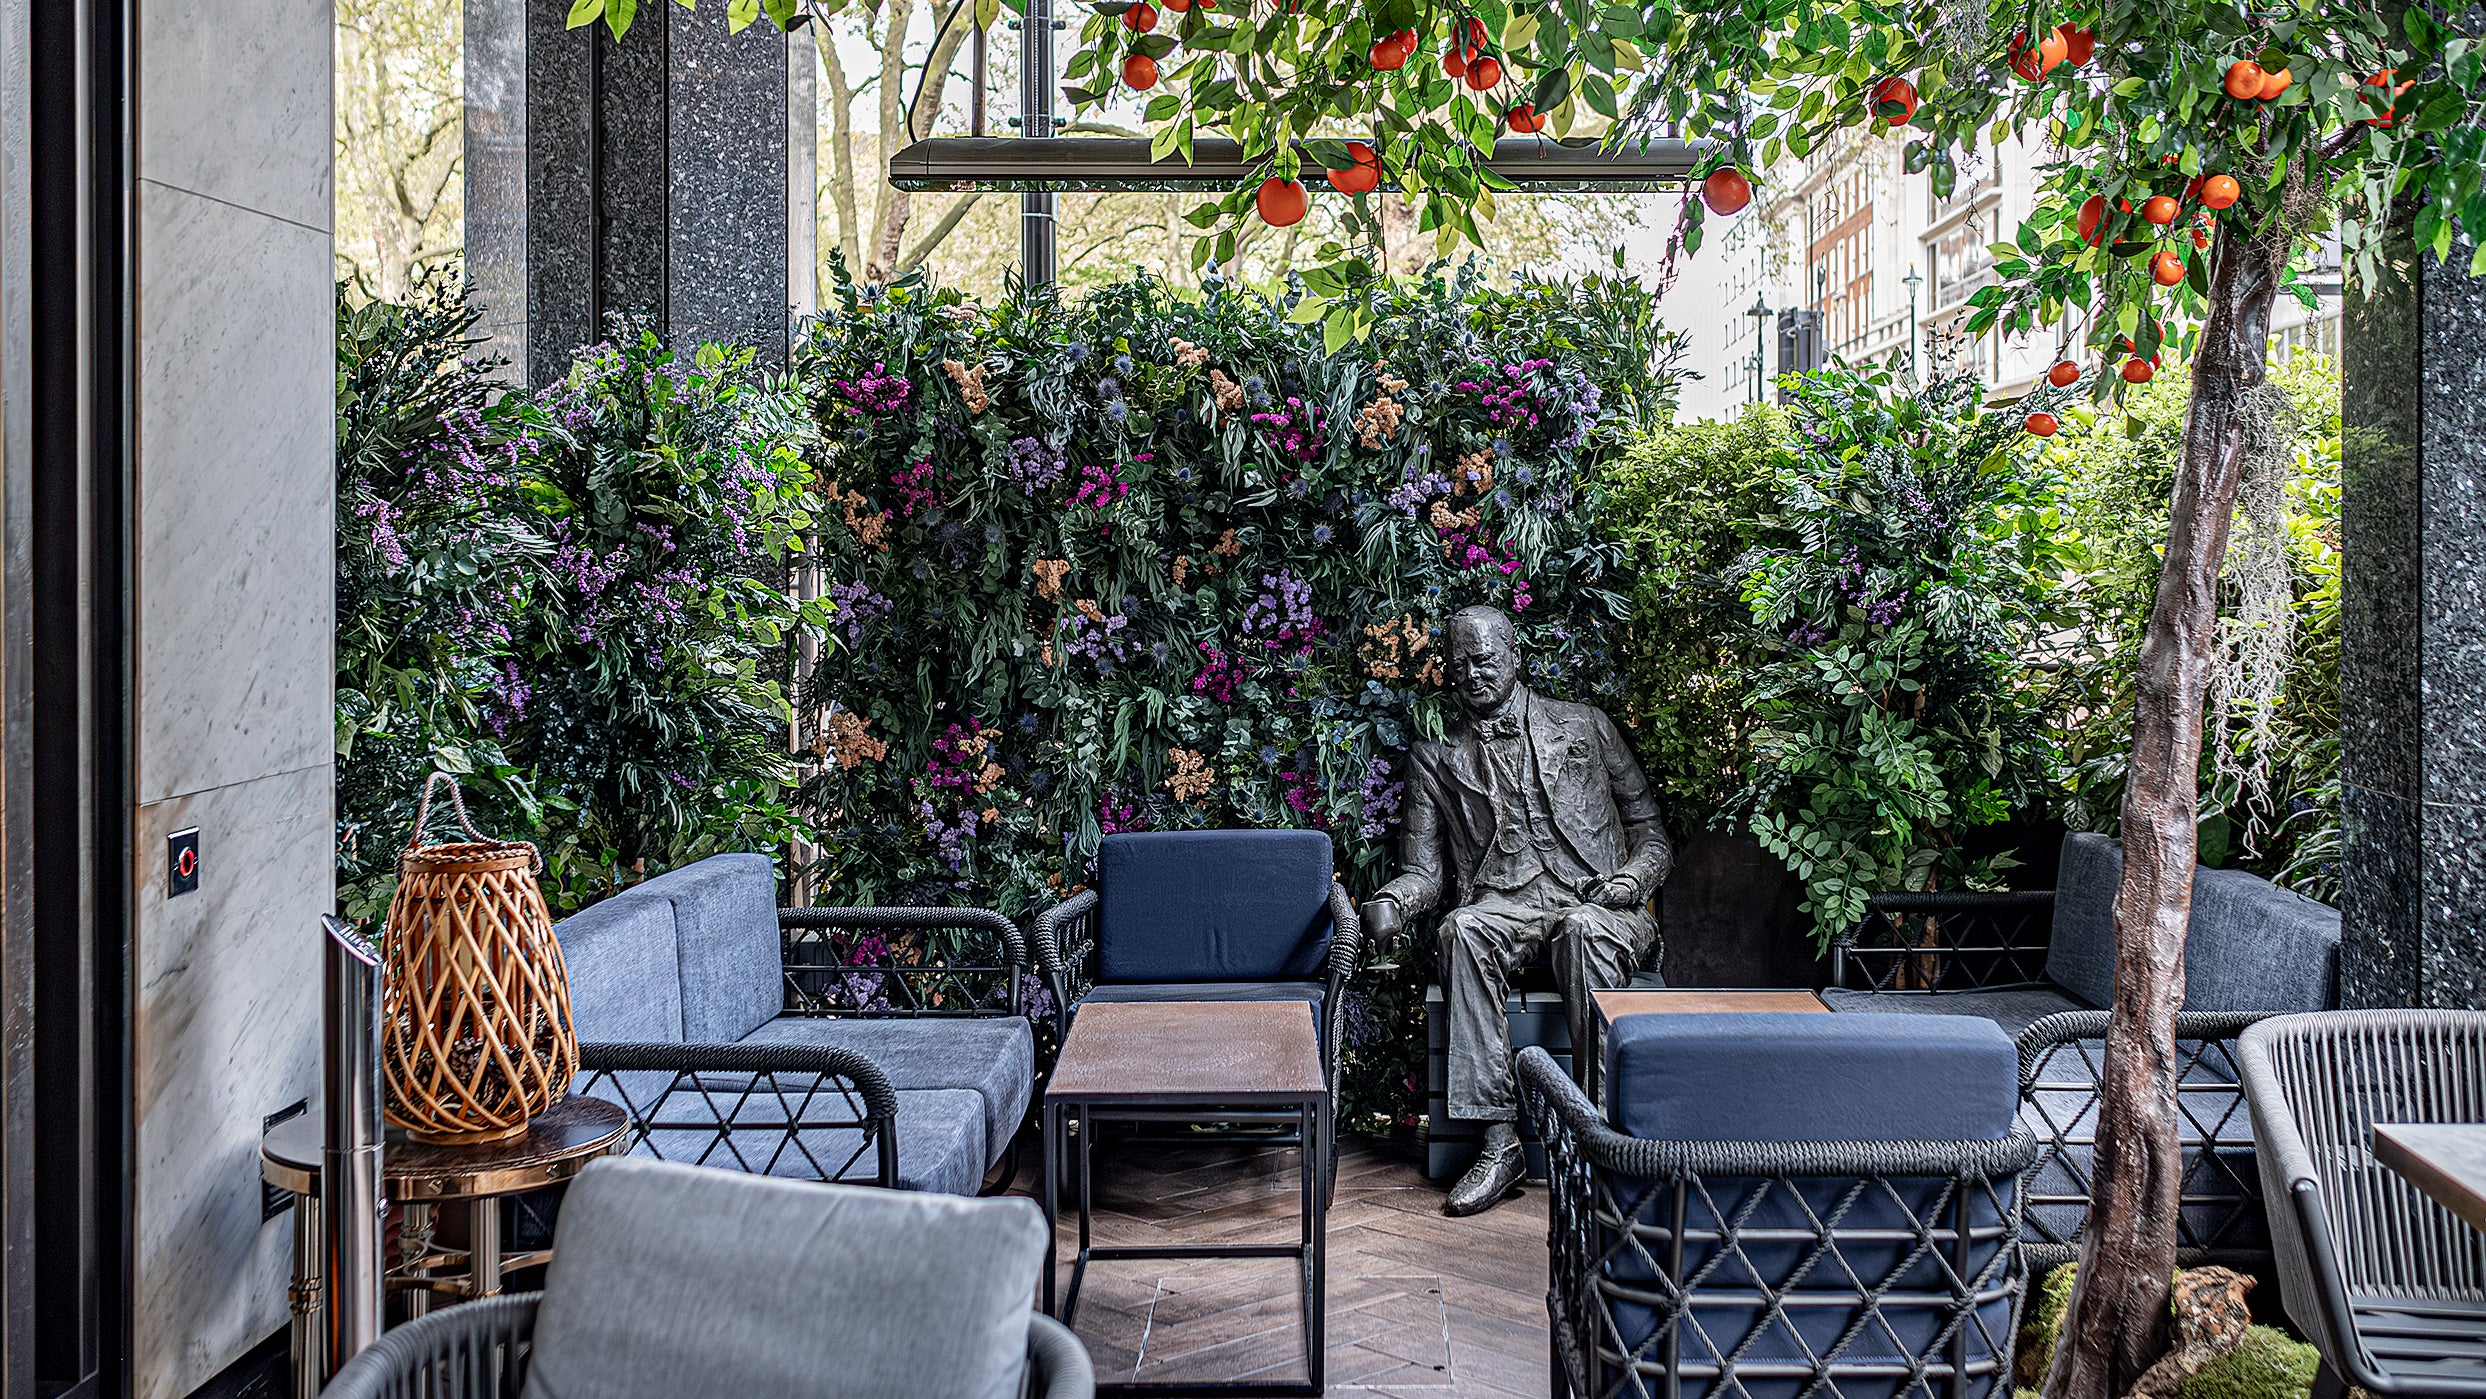 Bespoke floral summer terrace design from event florist Amaranté London, using only naturally preserved stems that last. 